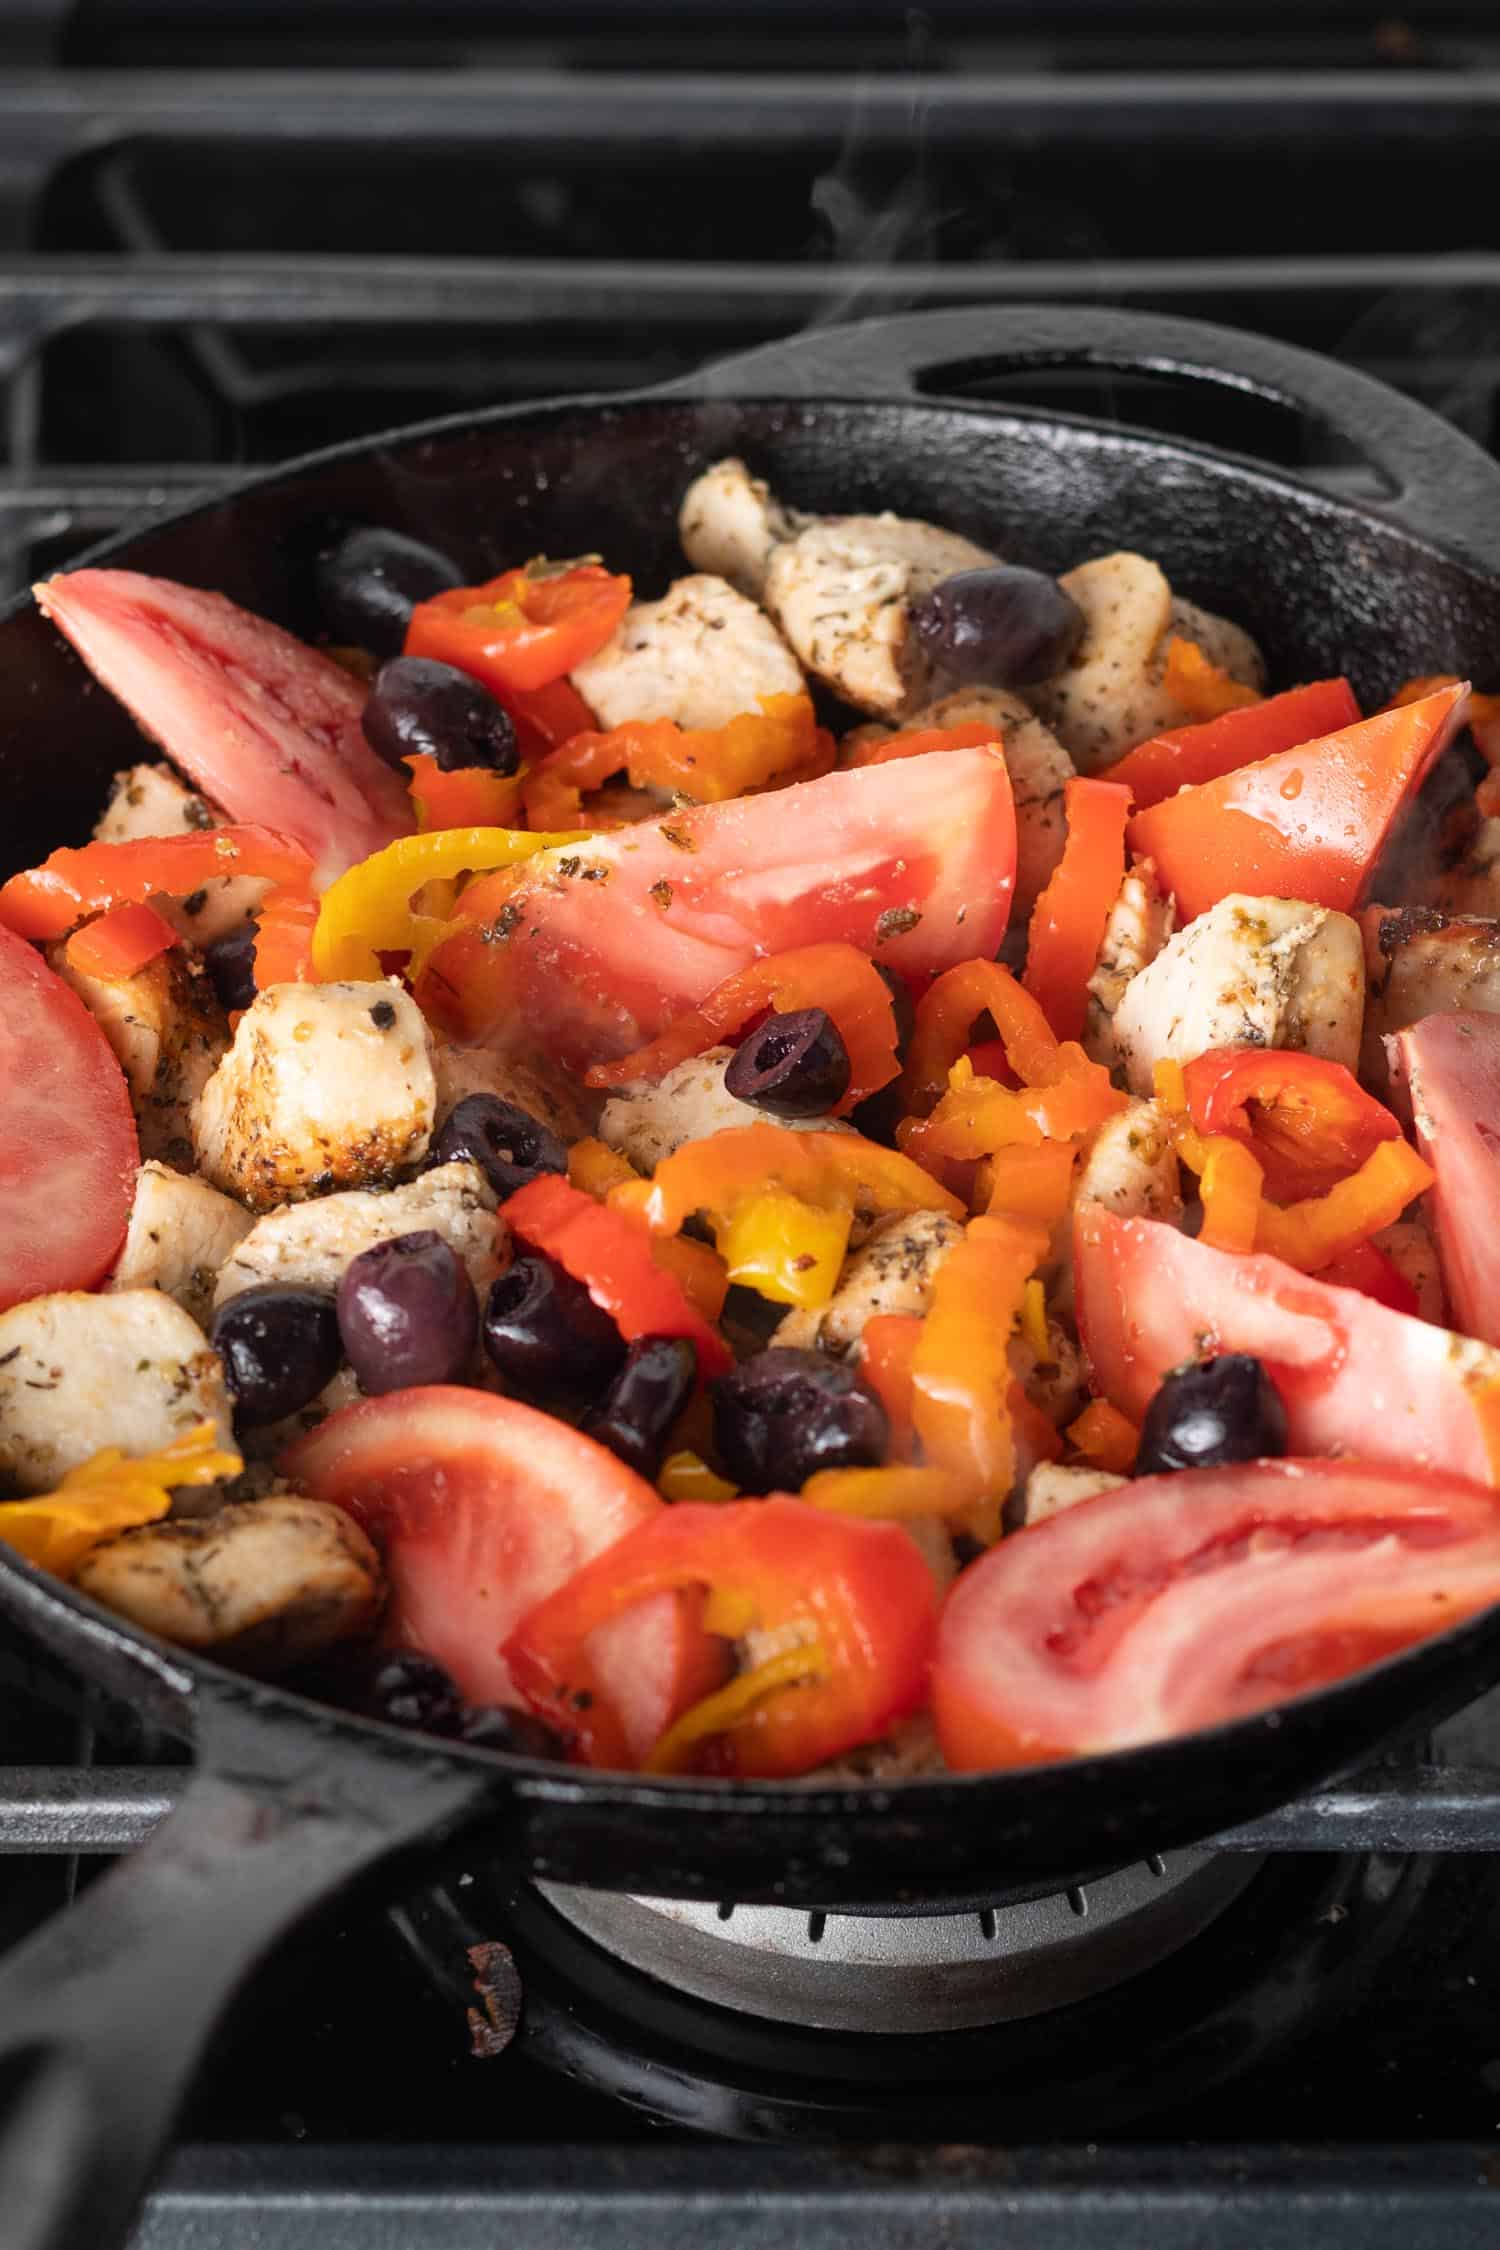 chicken, olives, tomatoes, and peppers in a cast iron skillet on top of a gas stove